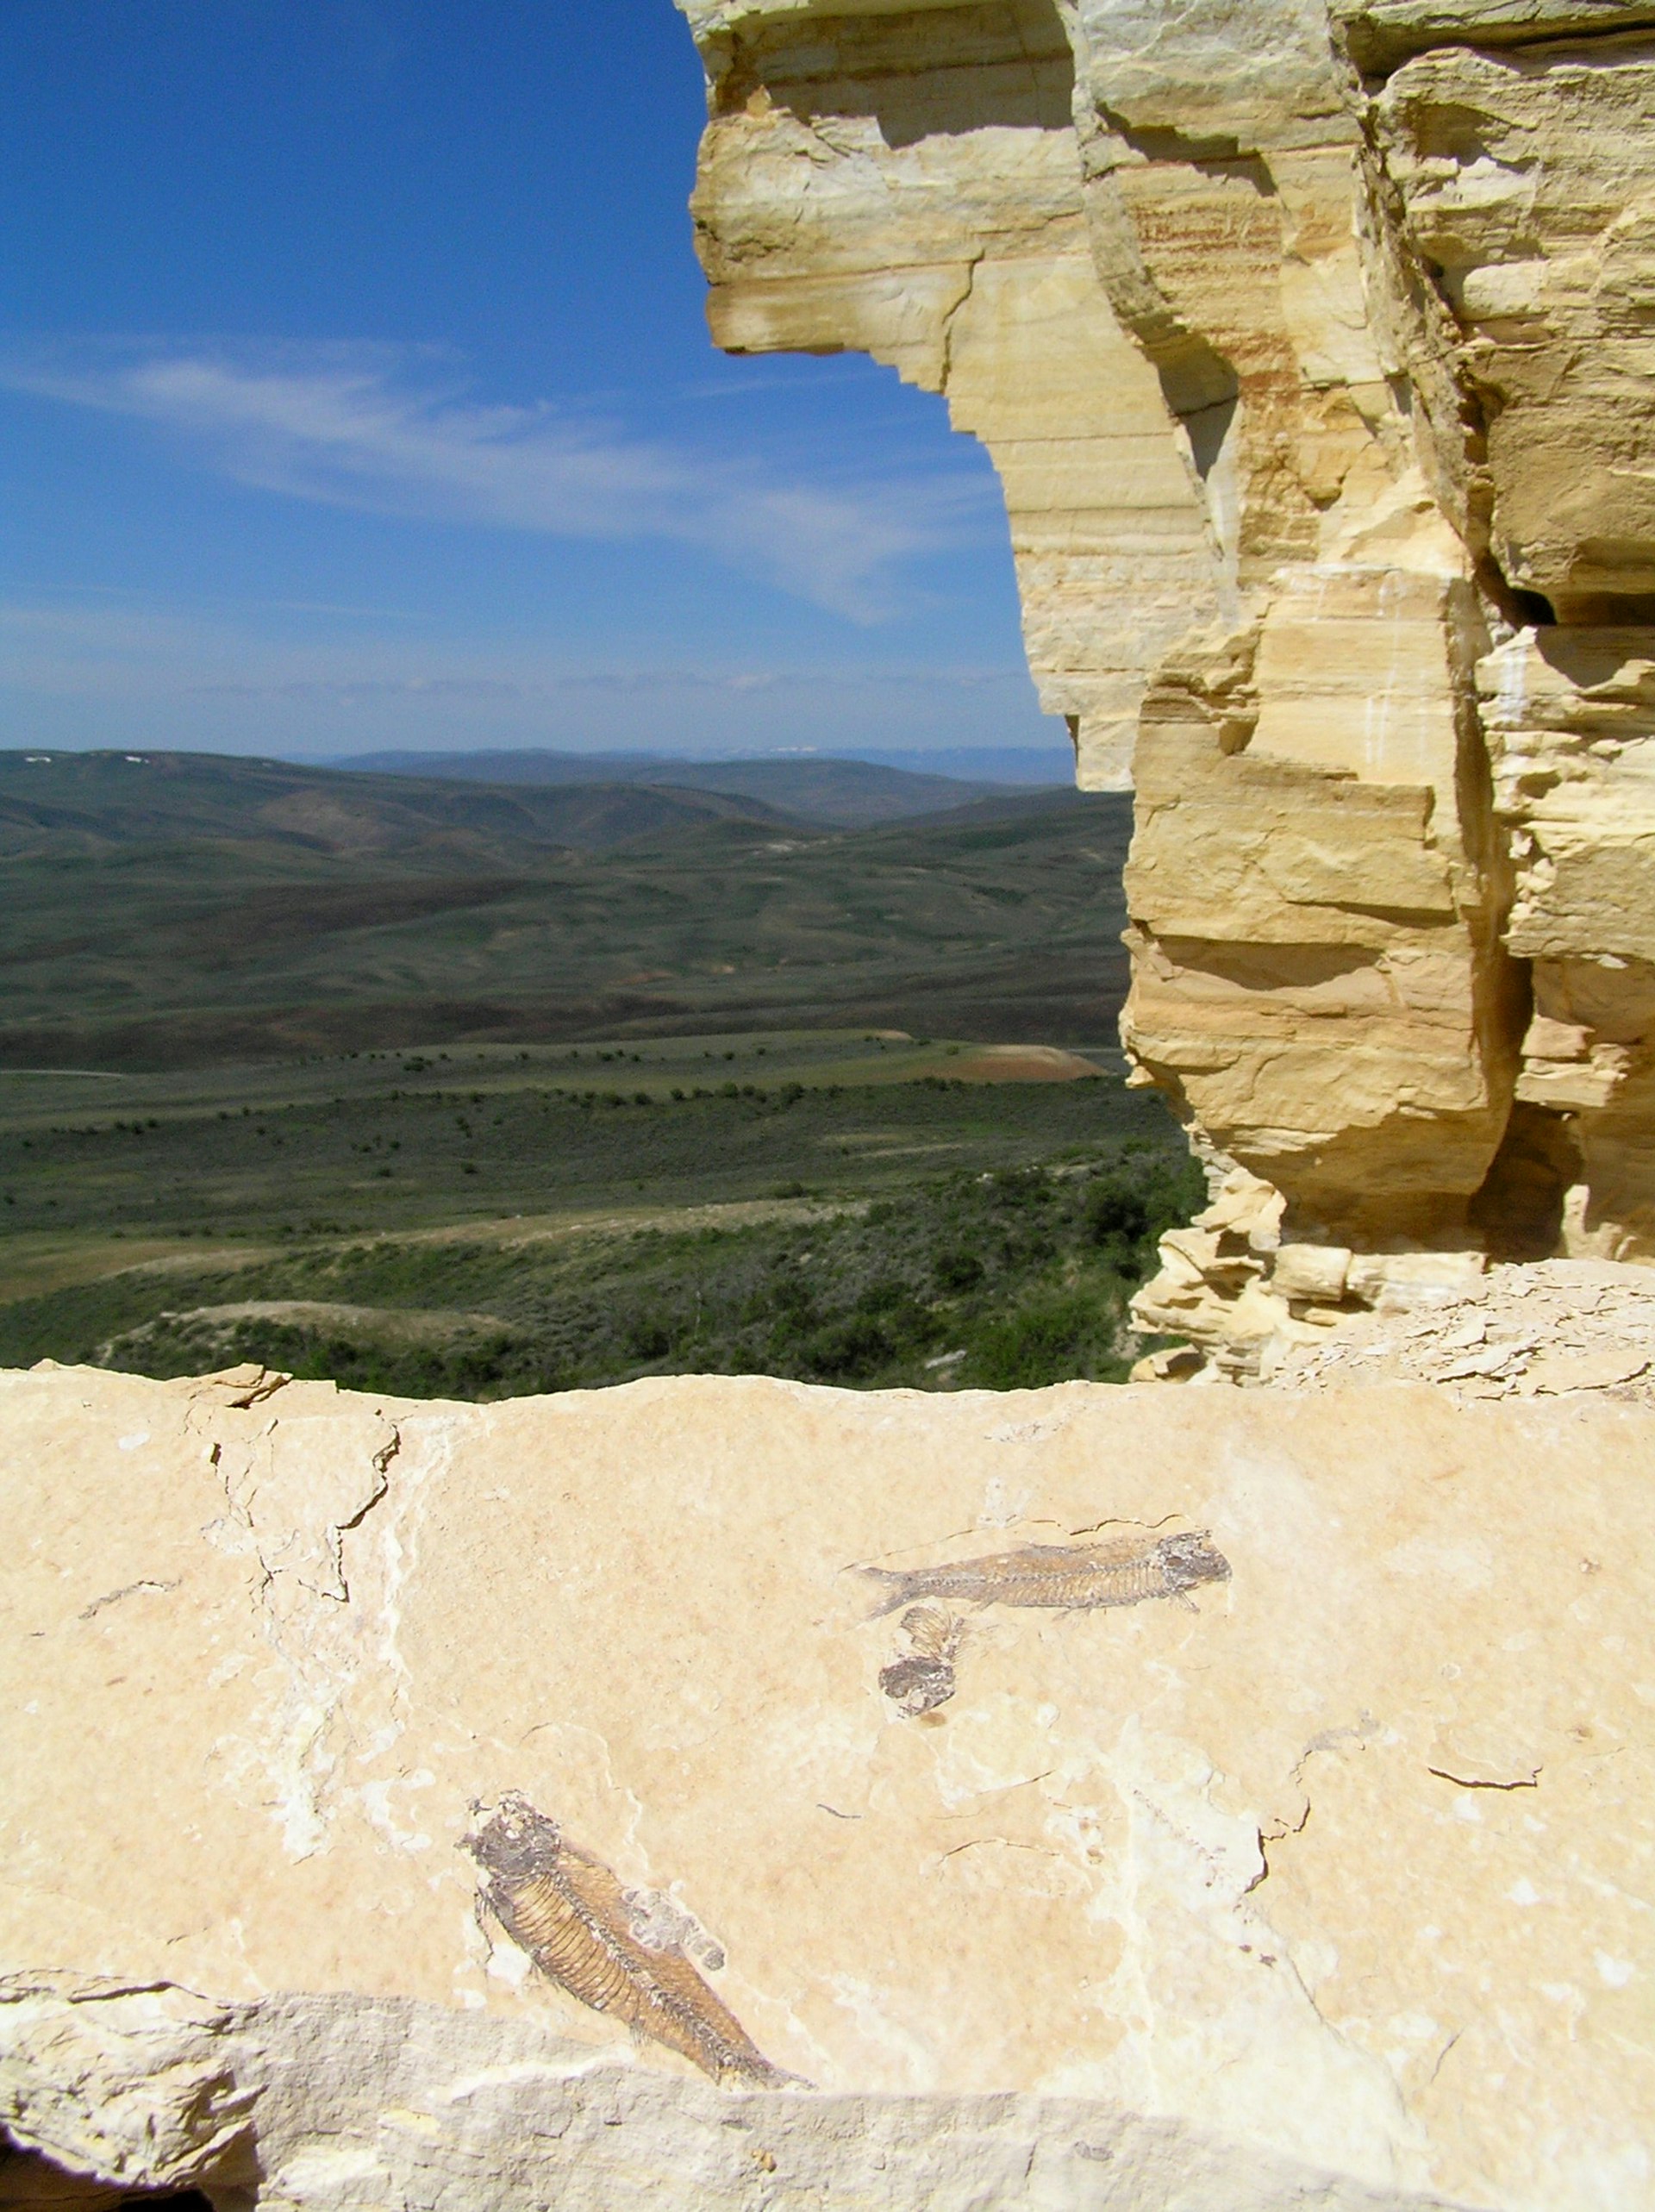 Fossils in a stone overlooking a valley in Wyoming